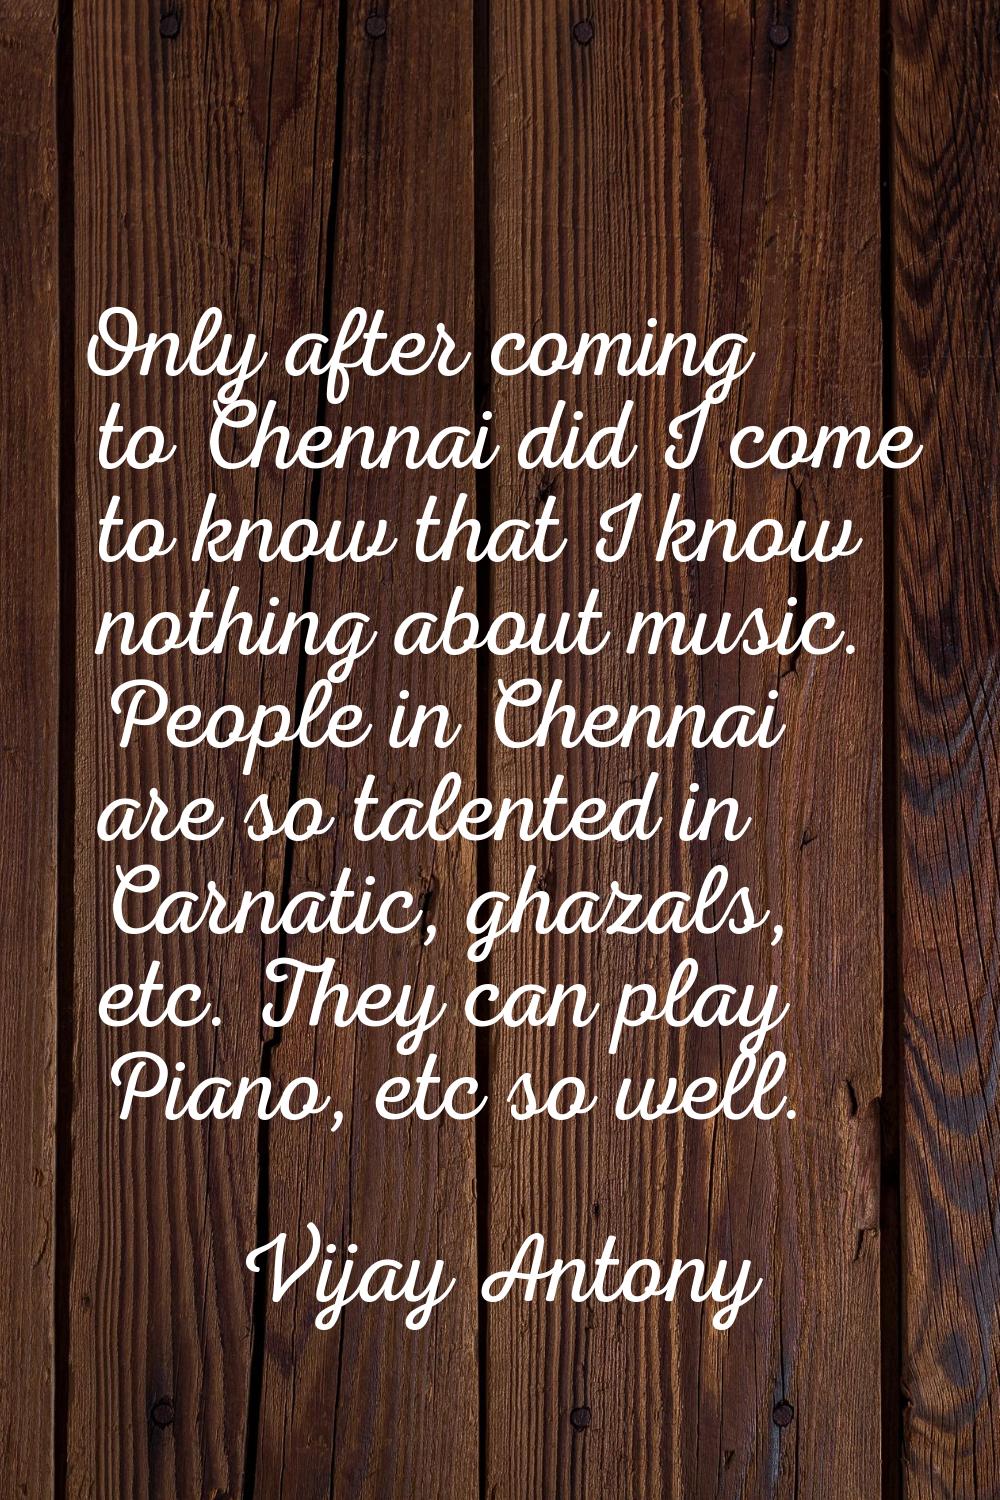 Only after coming to Chennai did I come to know that I know nothing about music. People in Chennai 